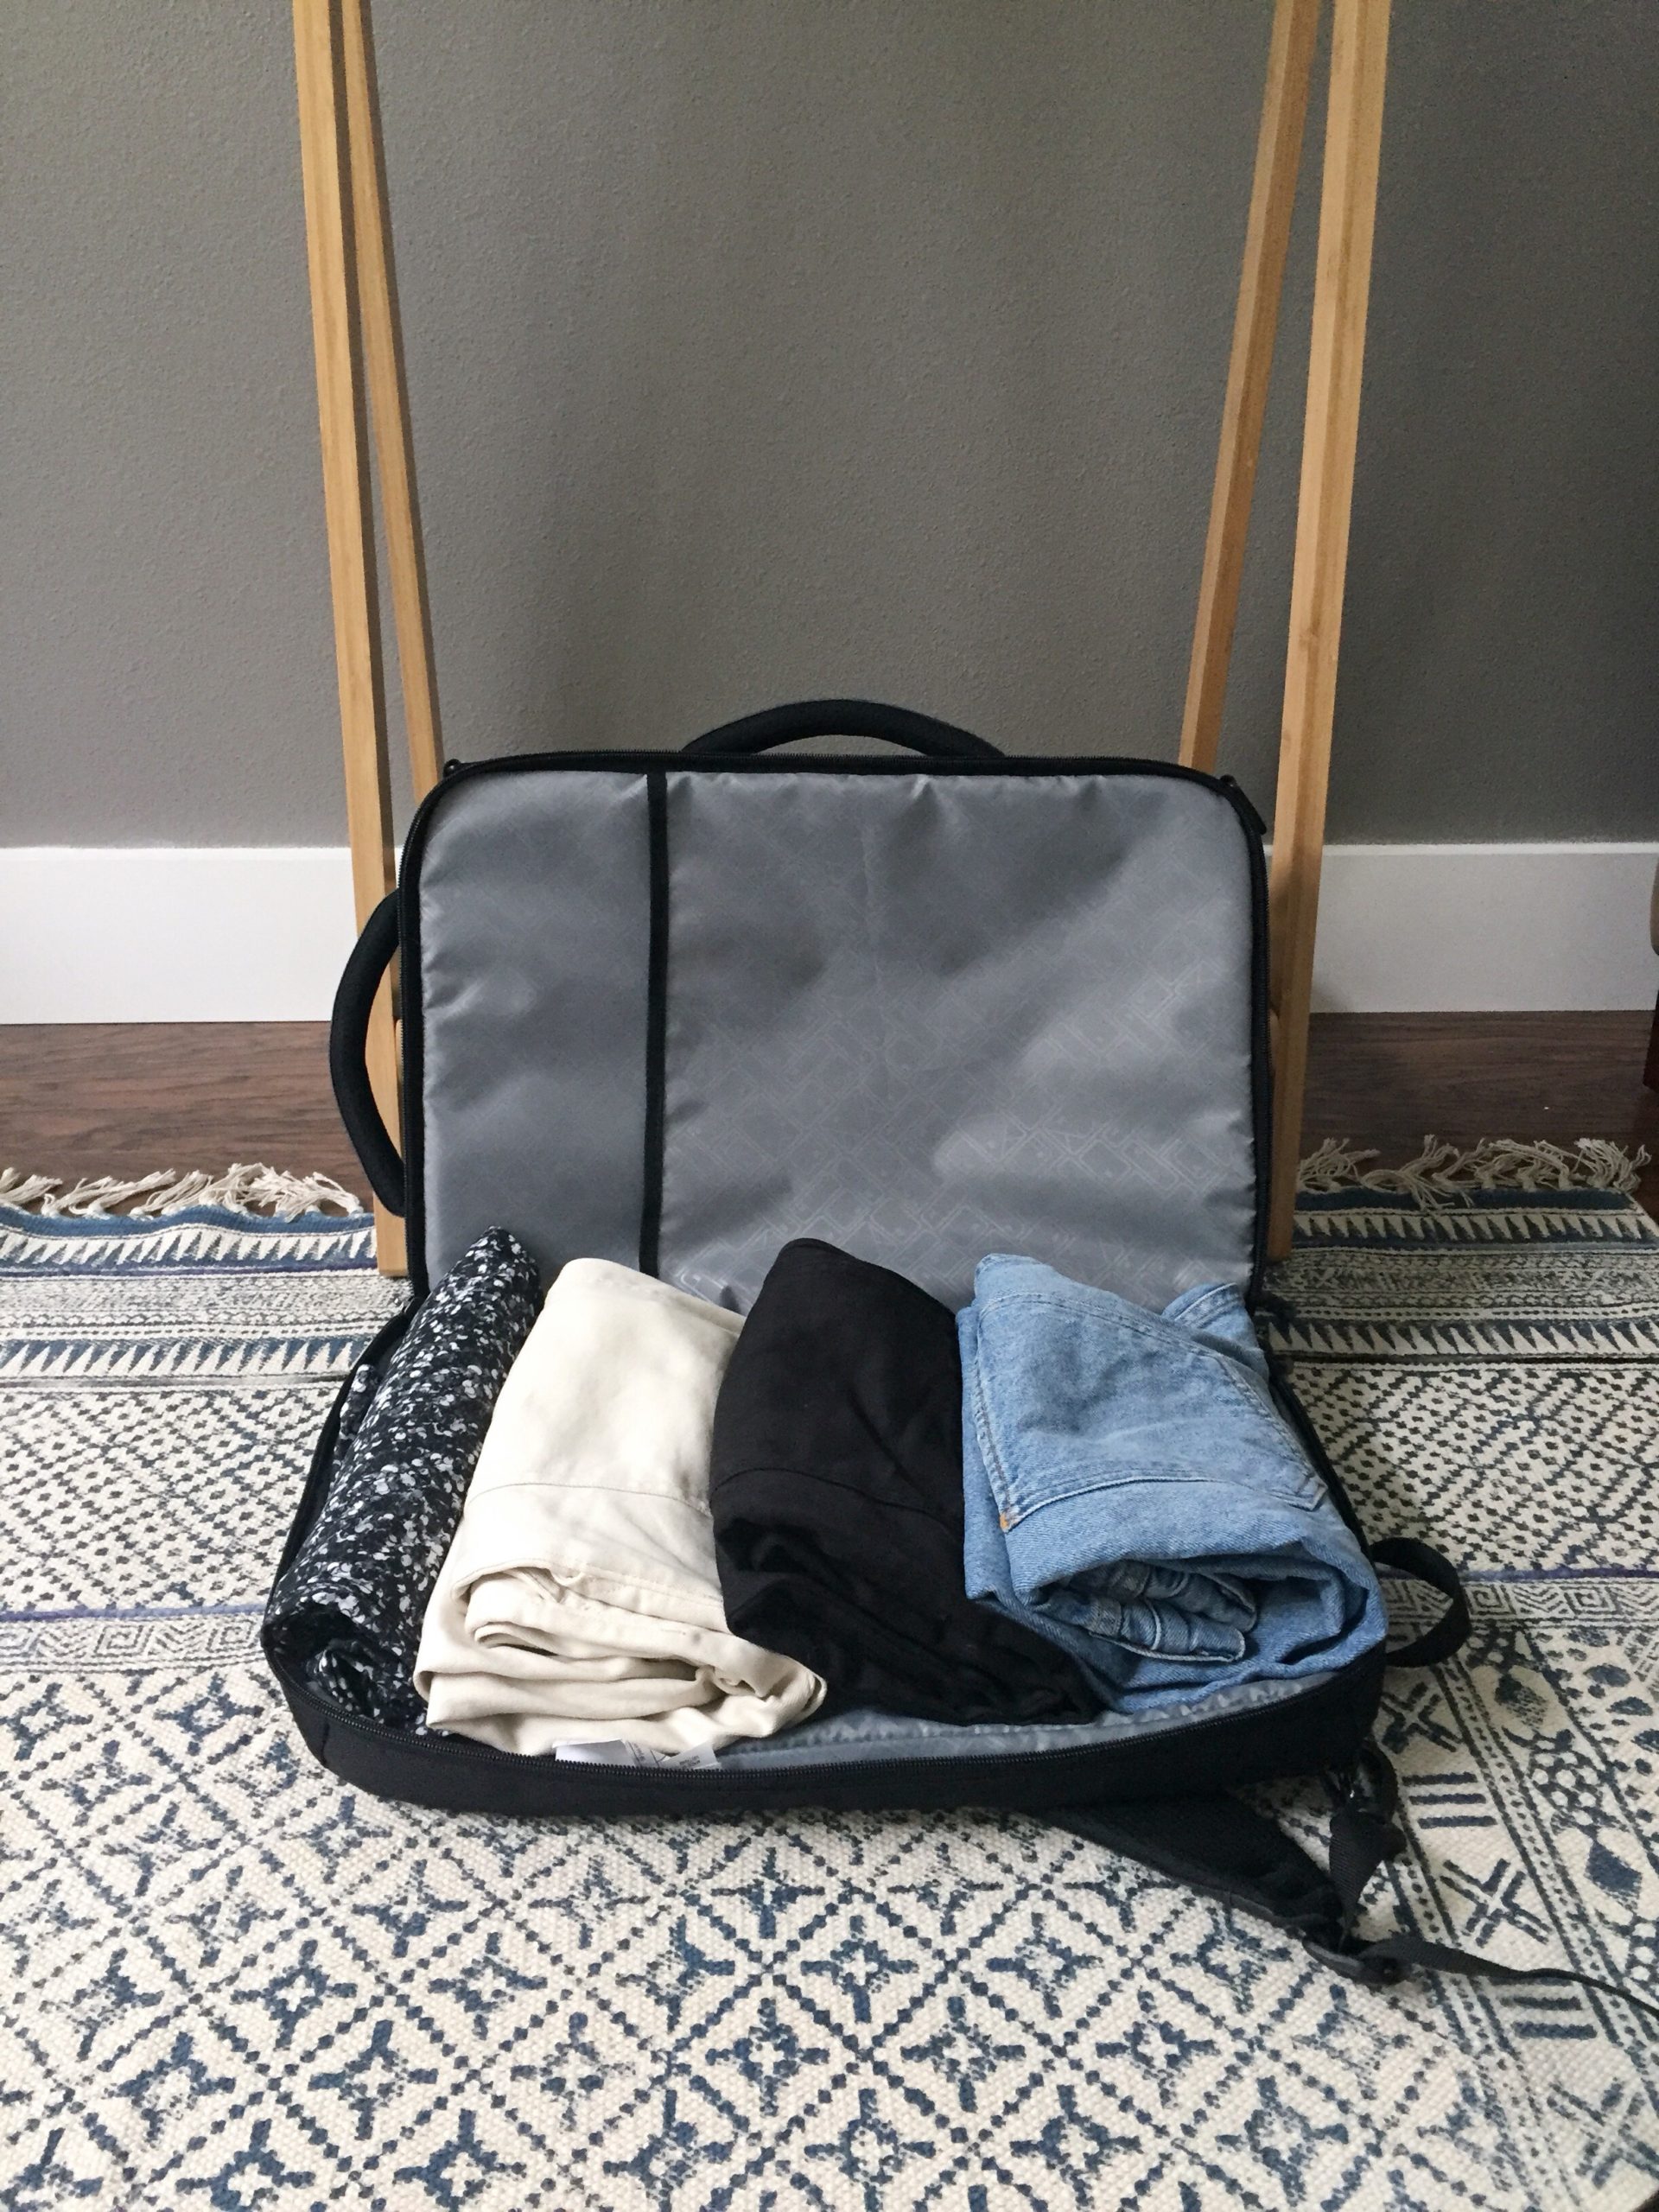 How I packed pants in my carry on luggage